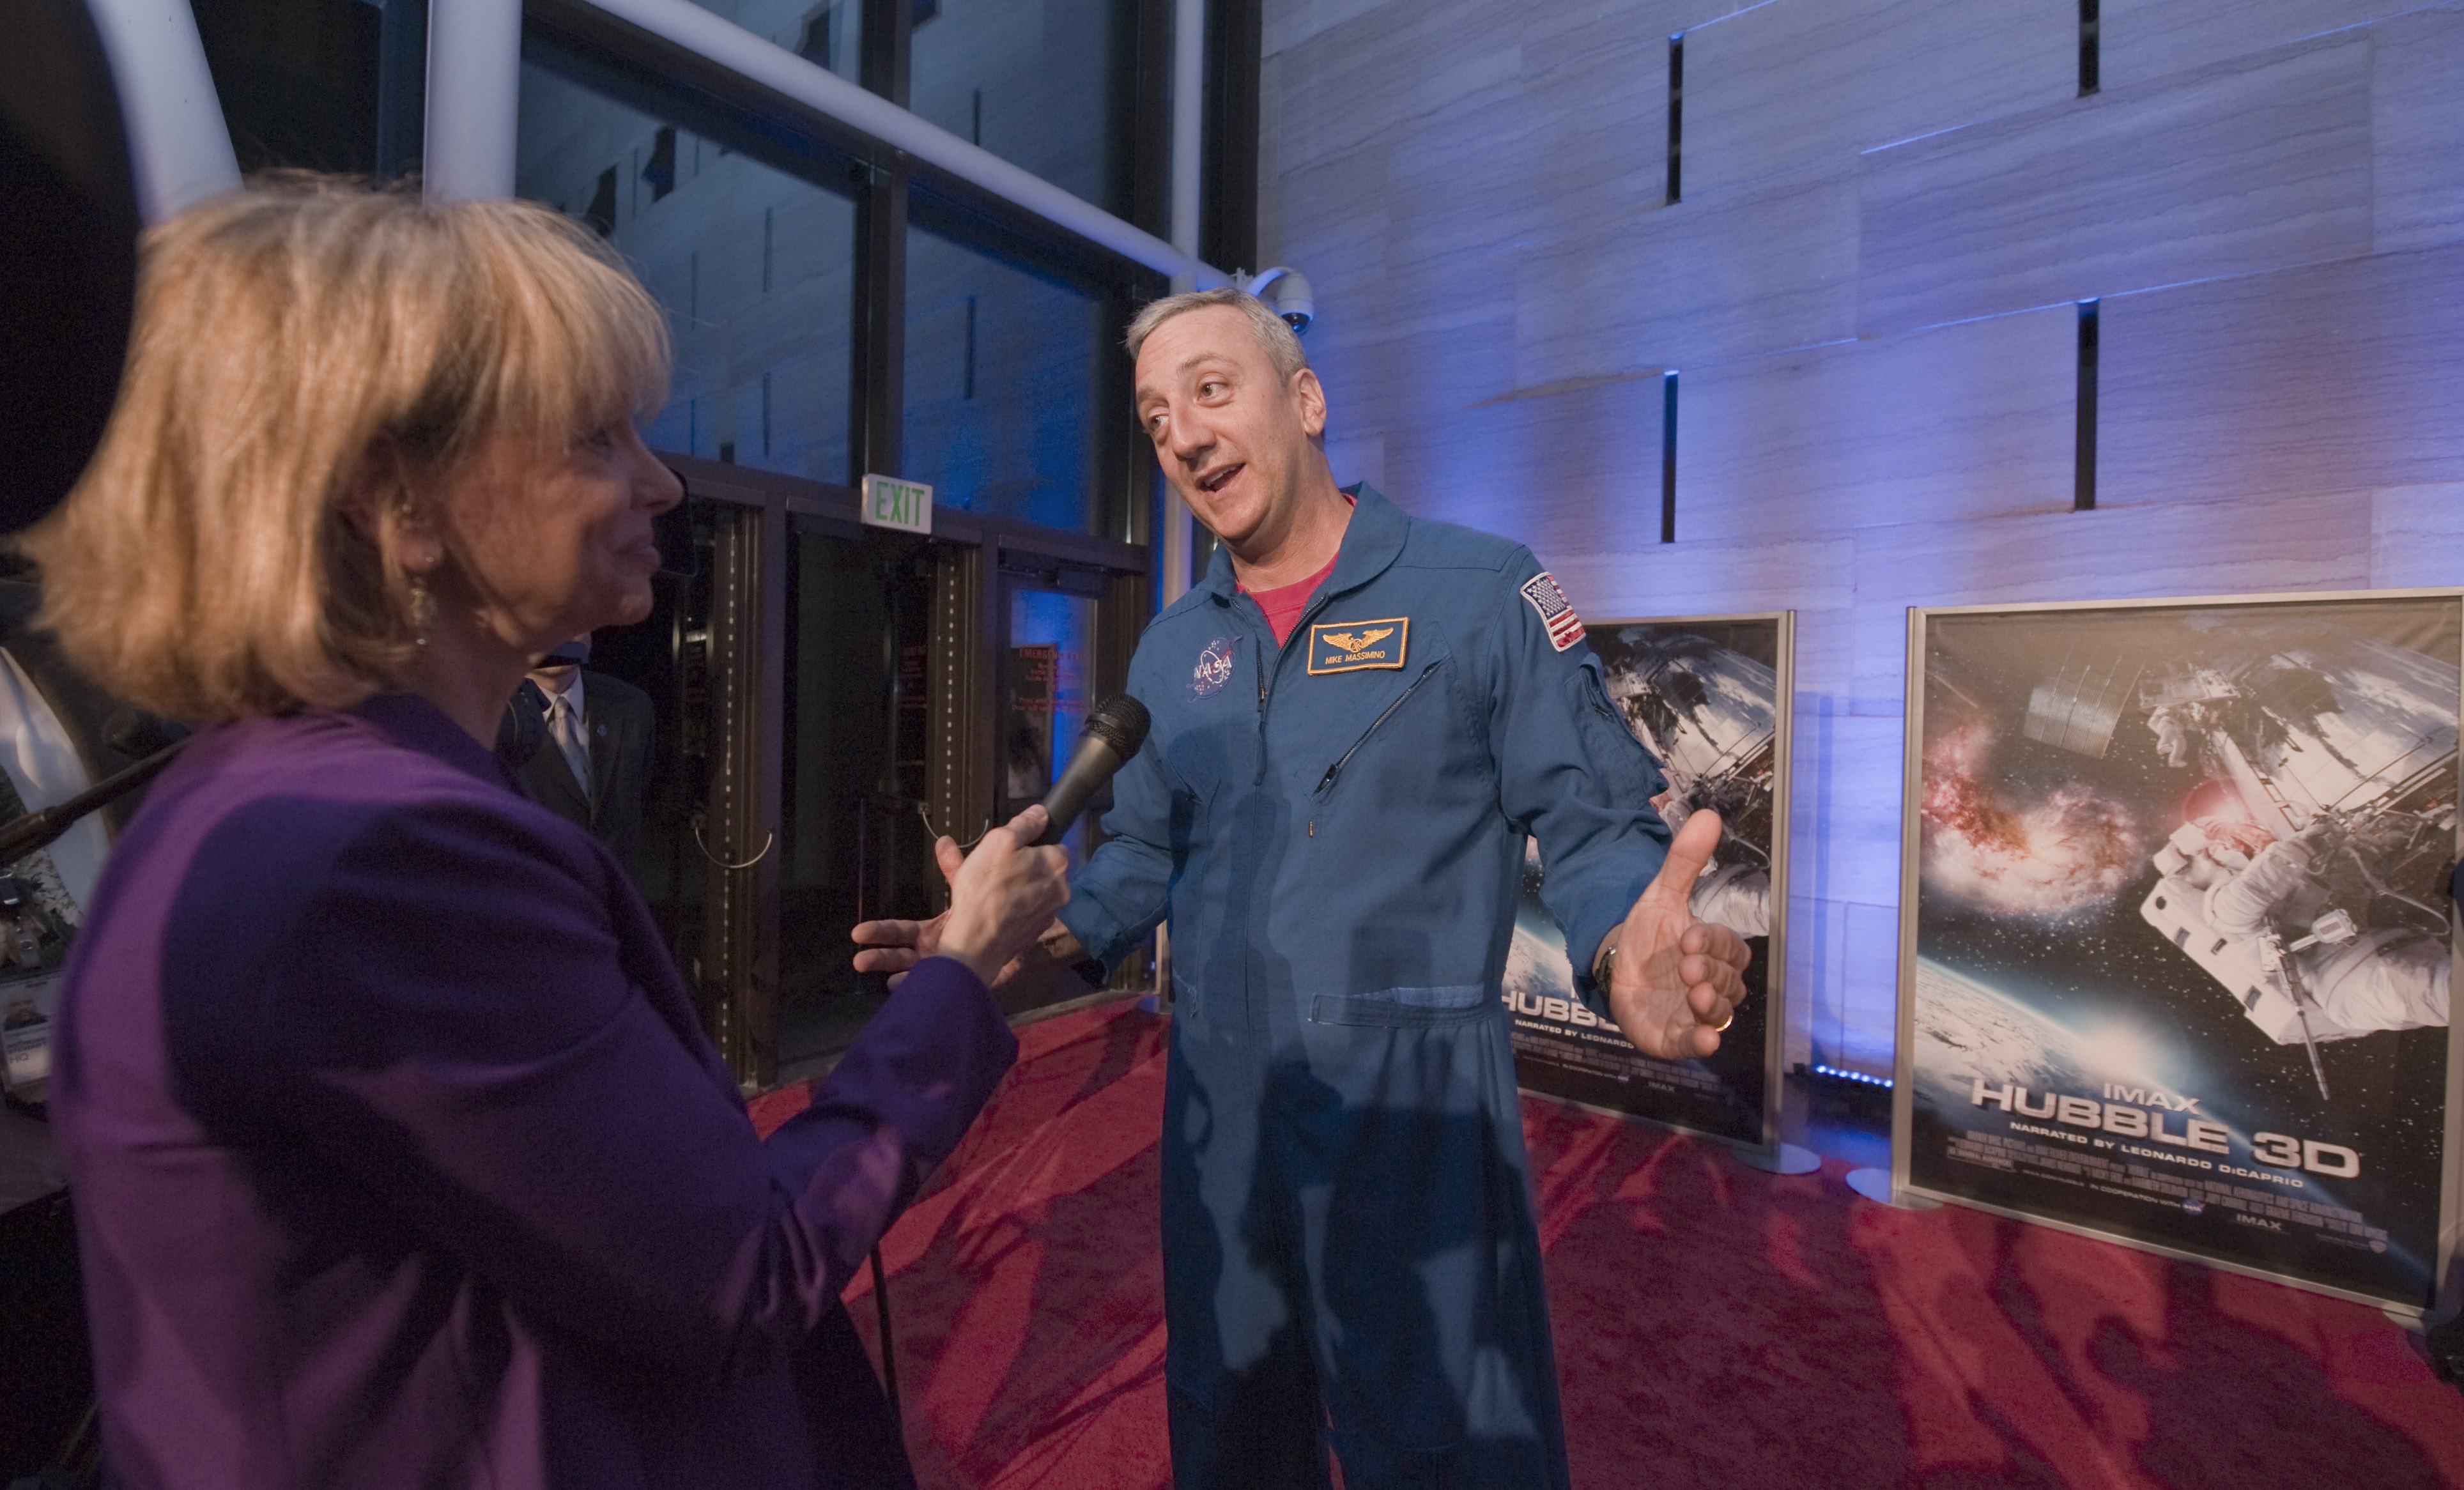 Astronaut Mike Massimino being interviewed by a reporter.